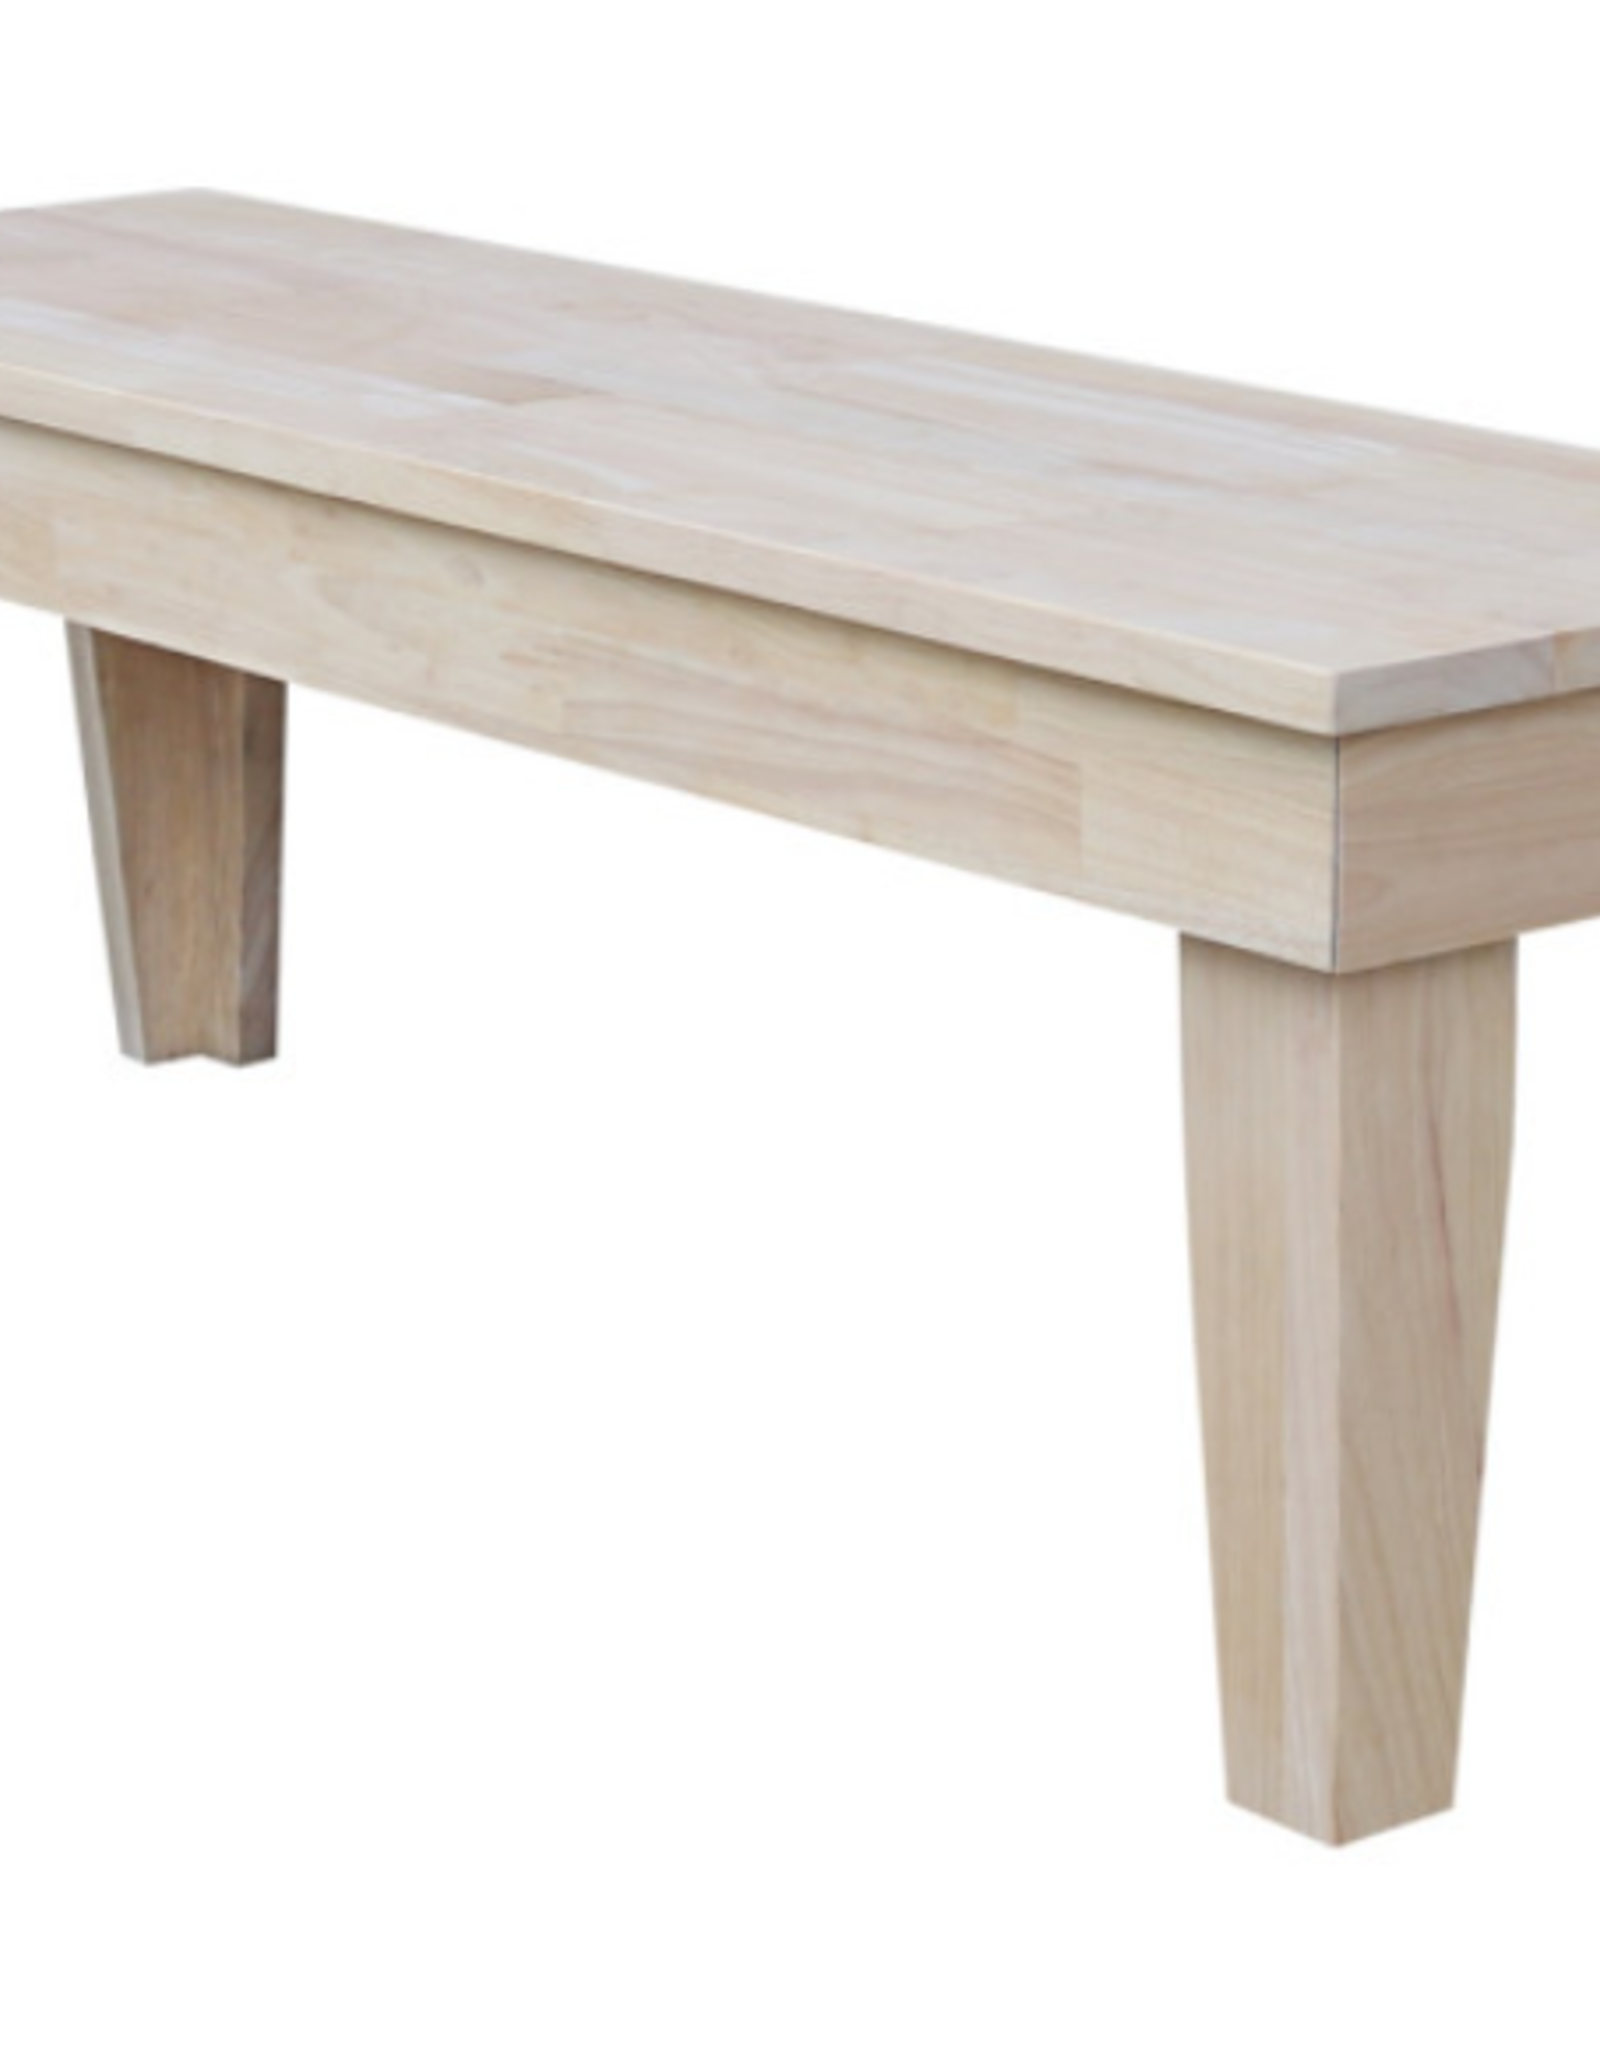 Whitewood Aspen Bench - Unfinished 52"W x 15"D x 18"H